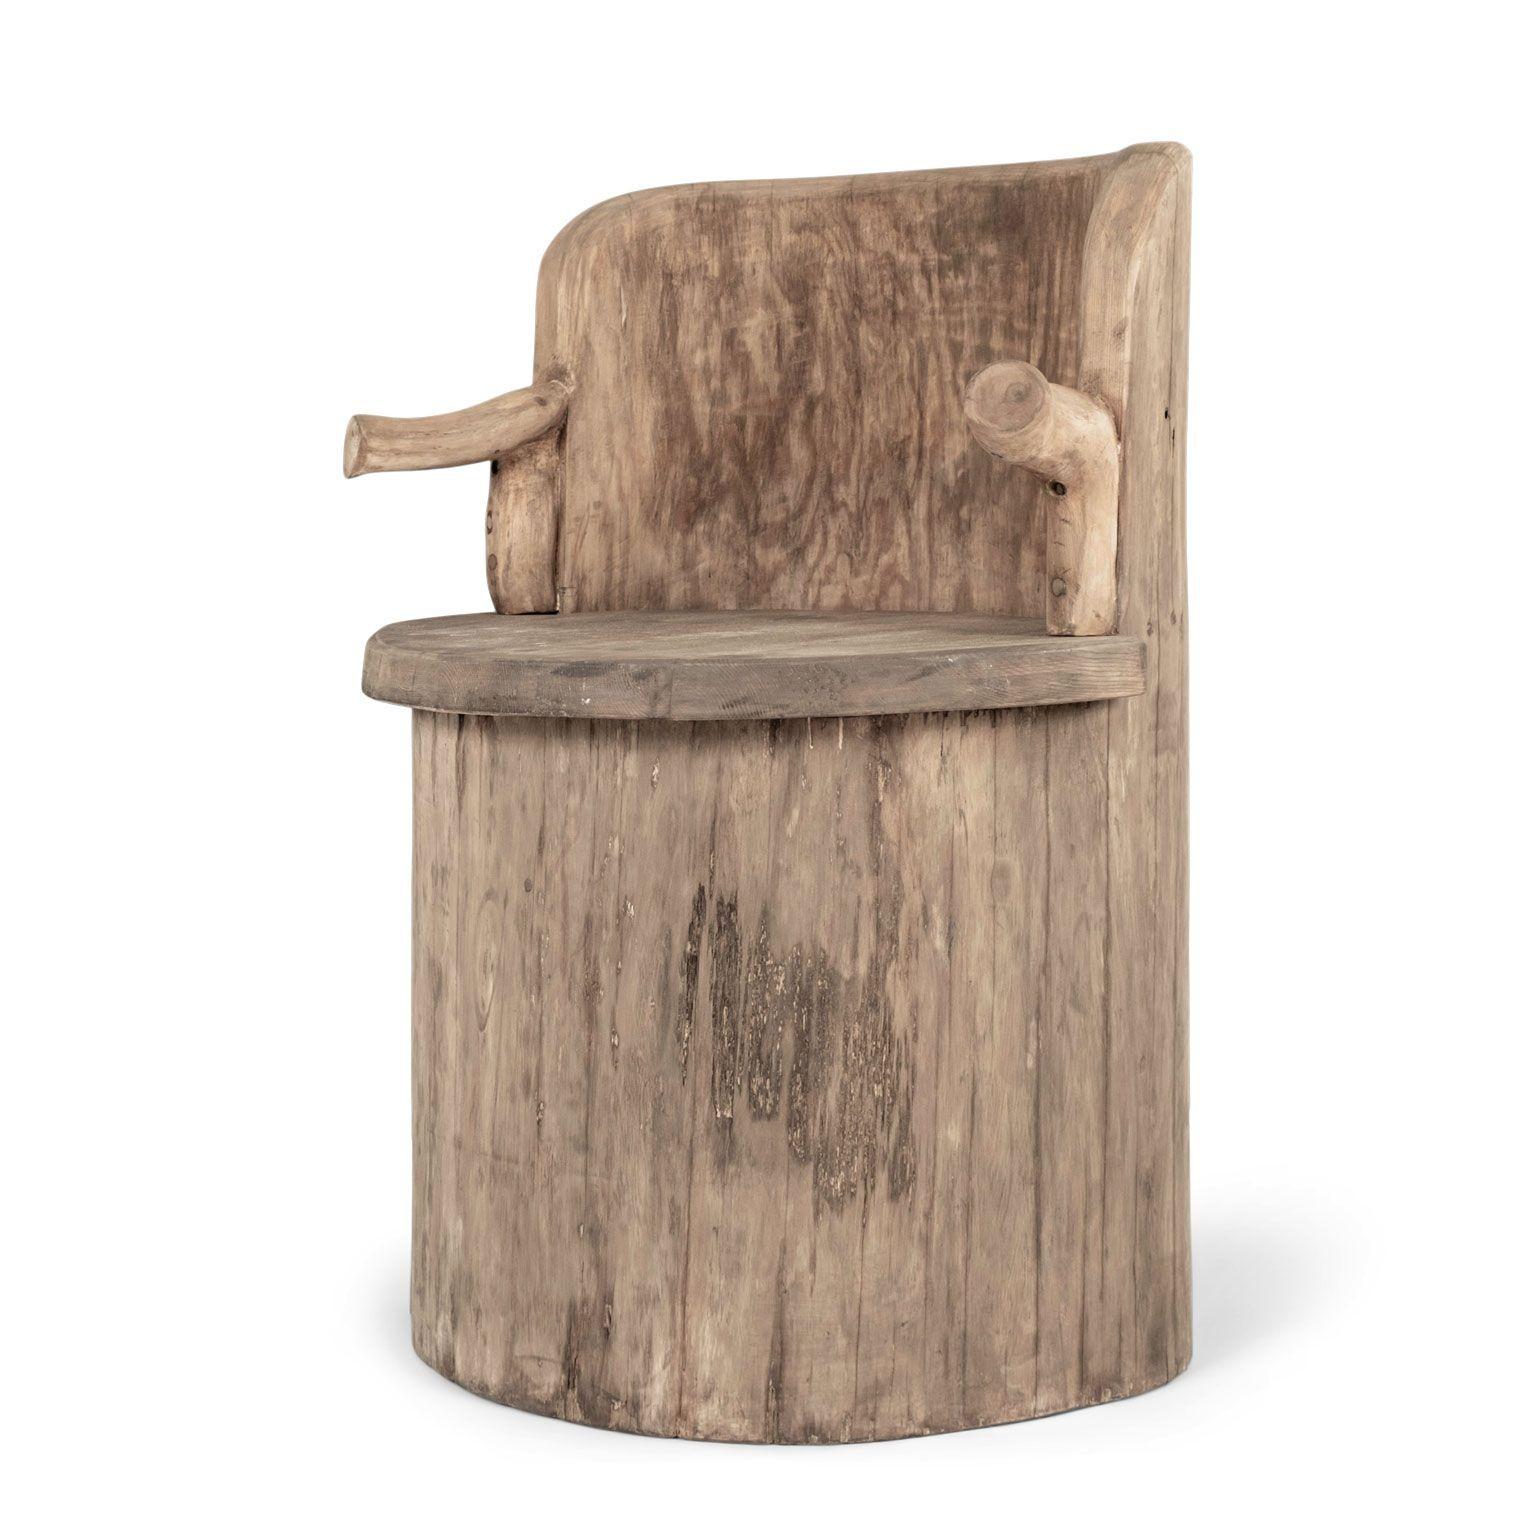 Large-Scale Swedish Pine Dugout Log Armchair (Kubbestol) For Sale 3